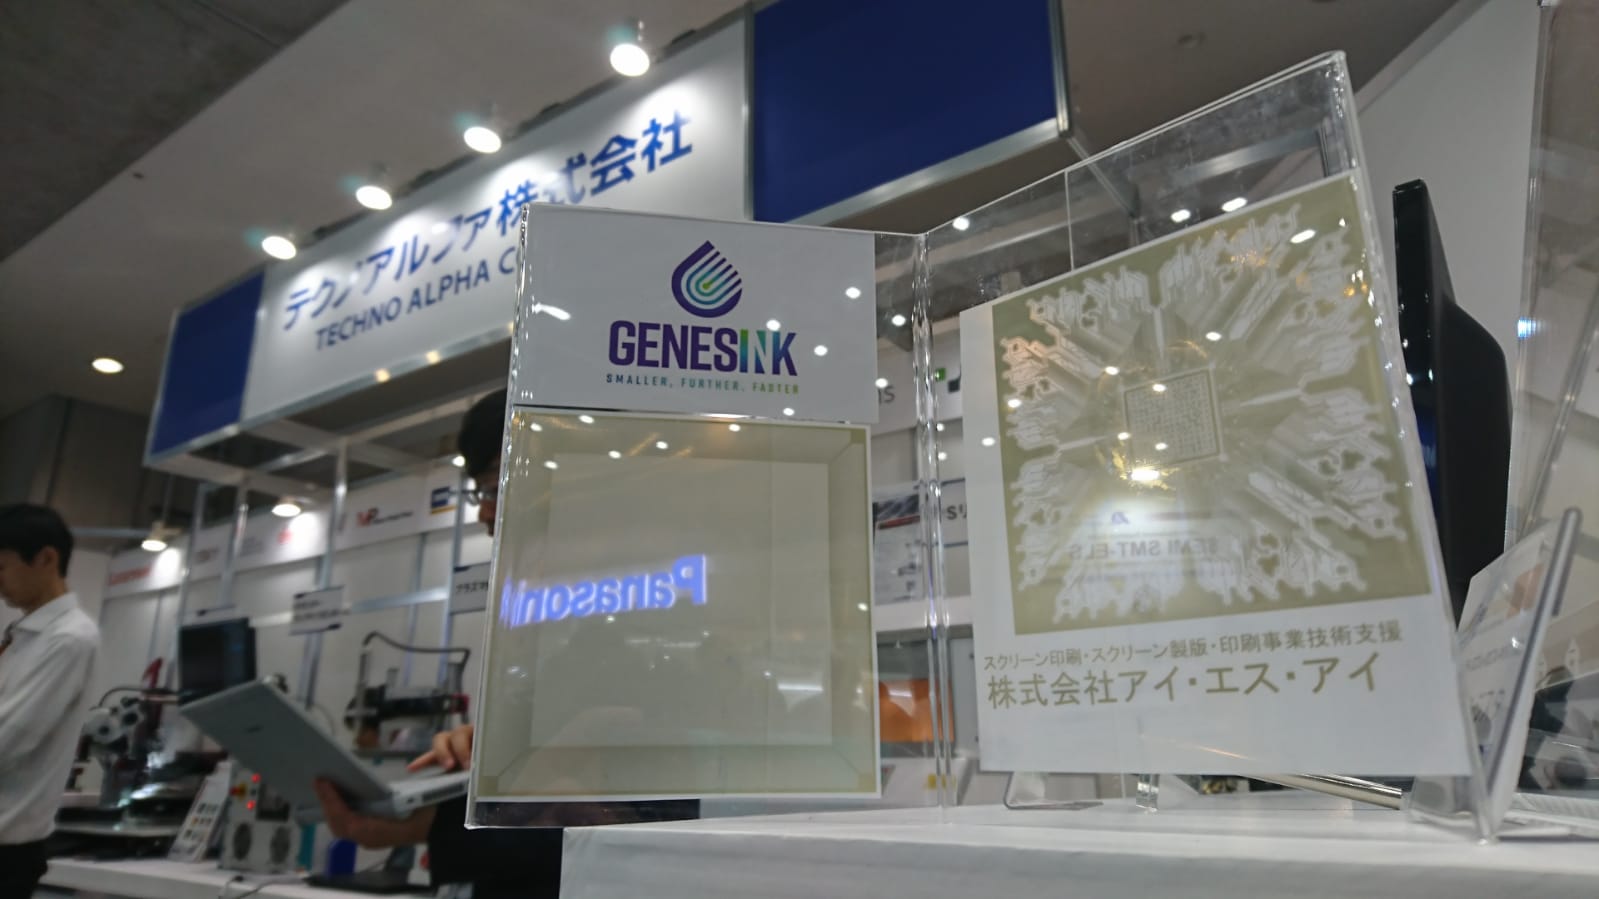 GenesInk demonstrate printed electronic ability at JPCA show in Tokyo